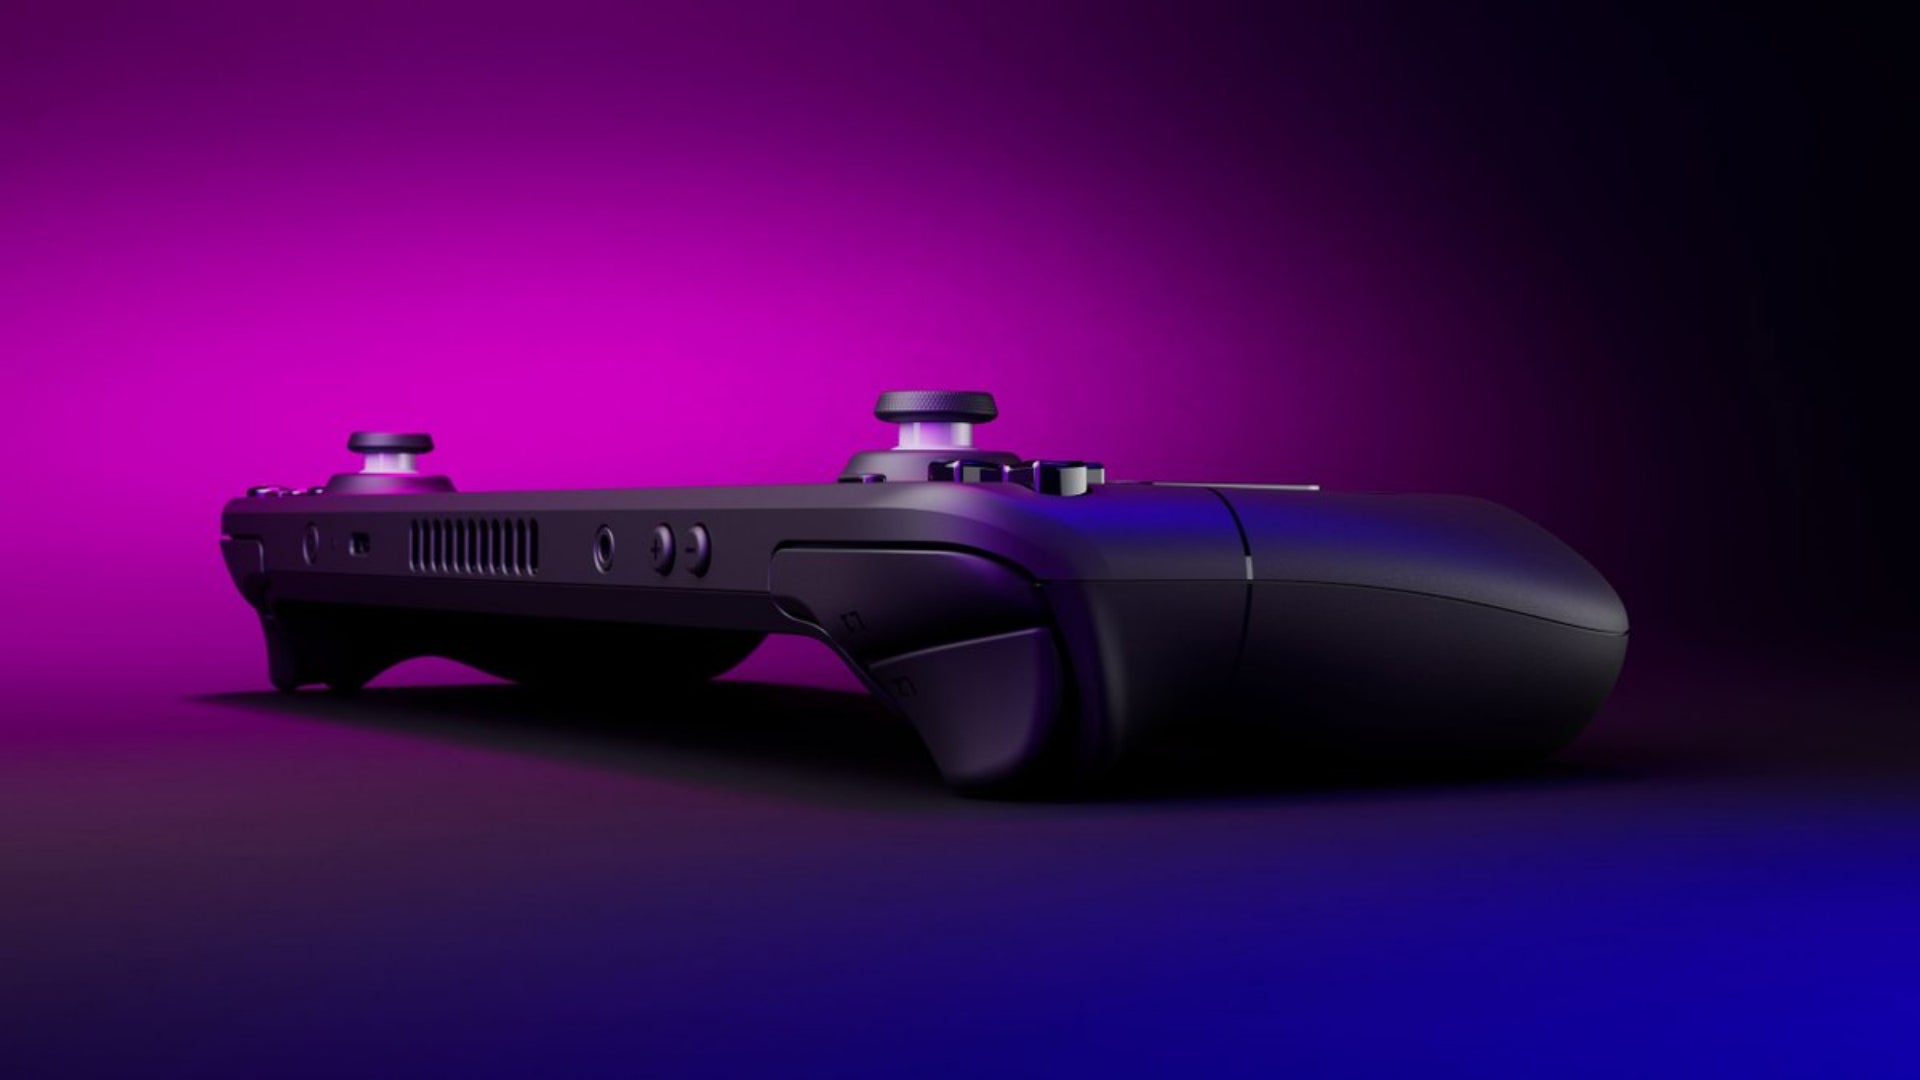 The Steam Deck, a handheld console, can be seen with a purple and blue backdrop.